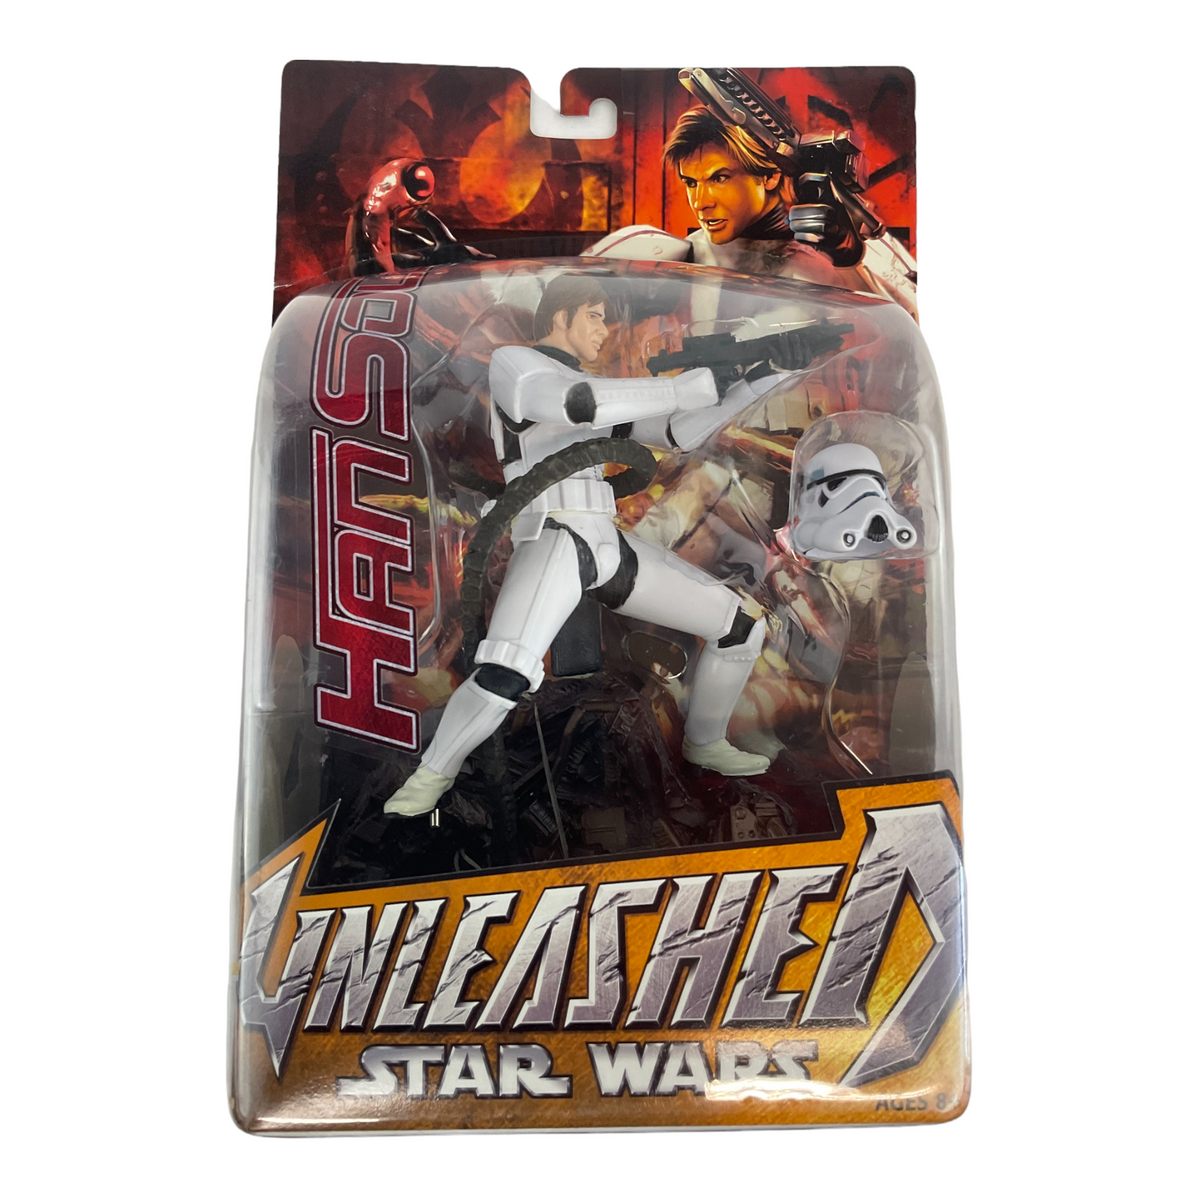 Star Wars Unleashed Han Solo In Stormtrooper Outfit Collectors Figure